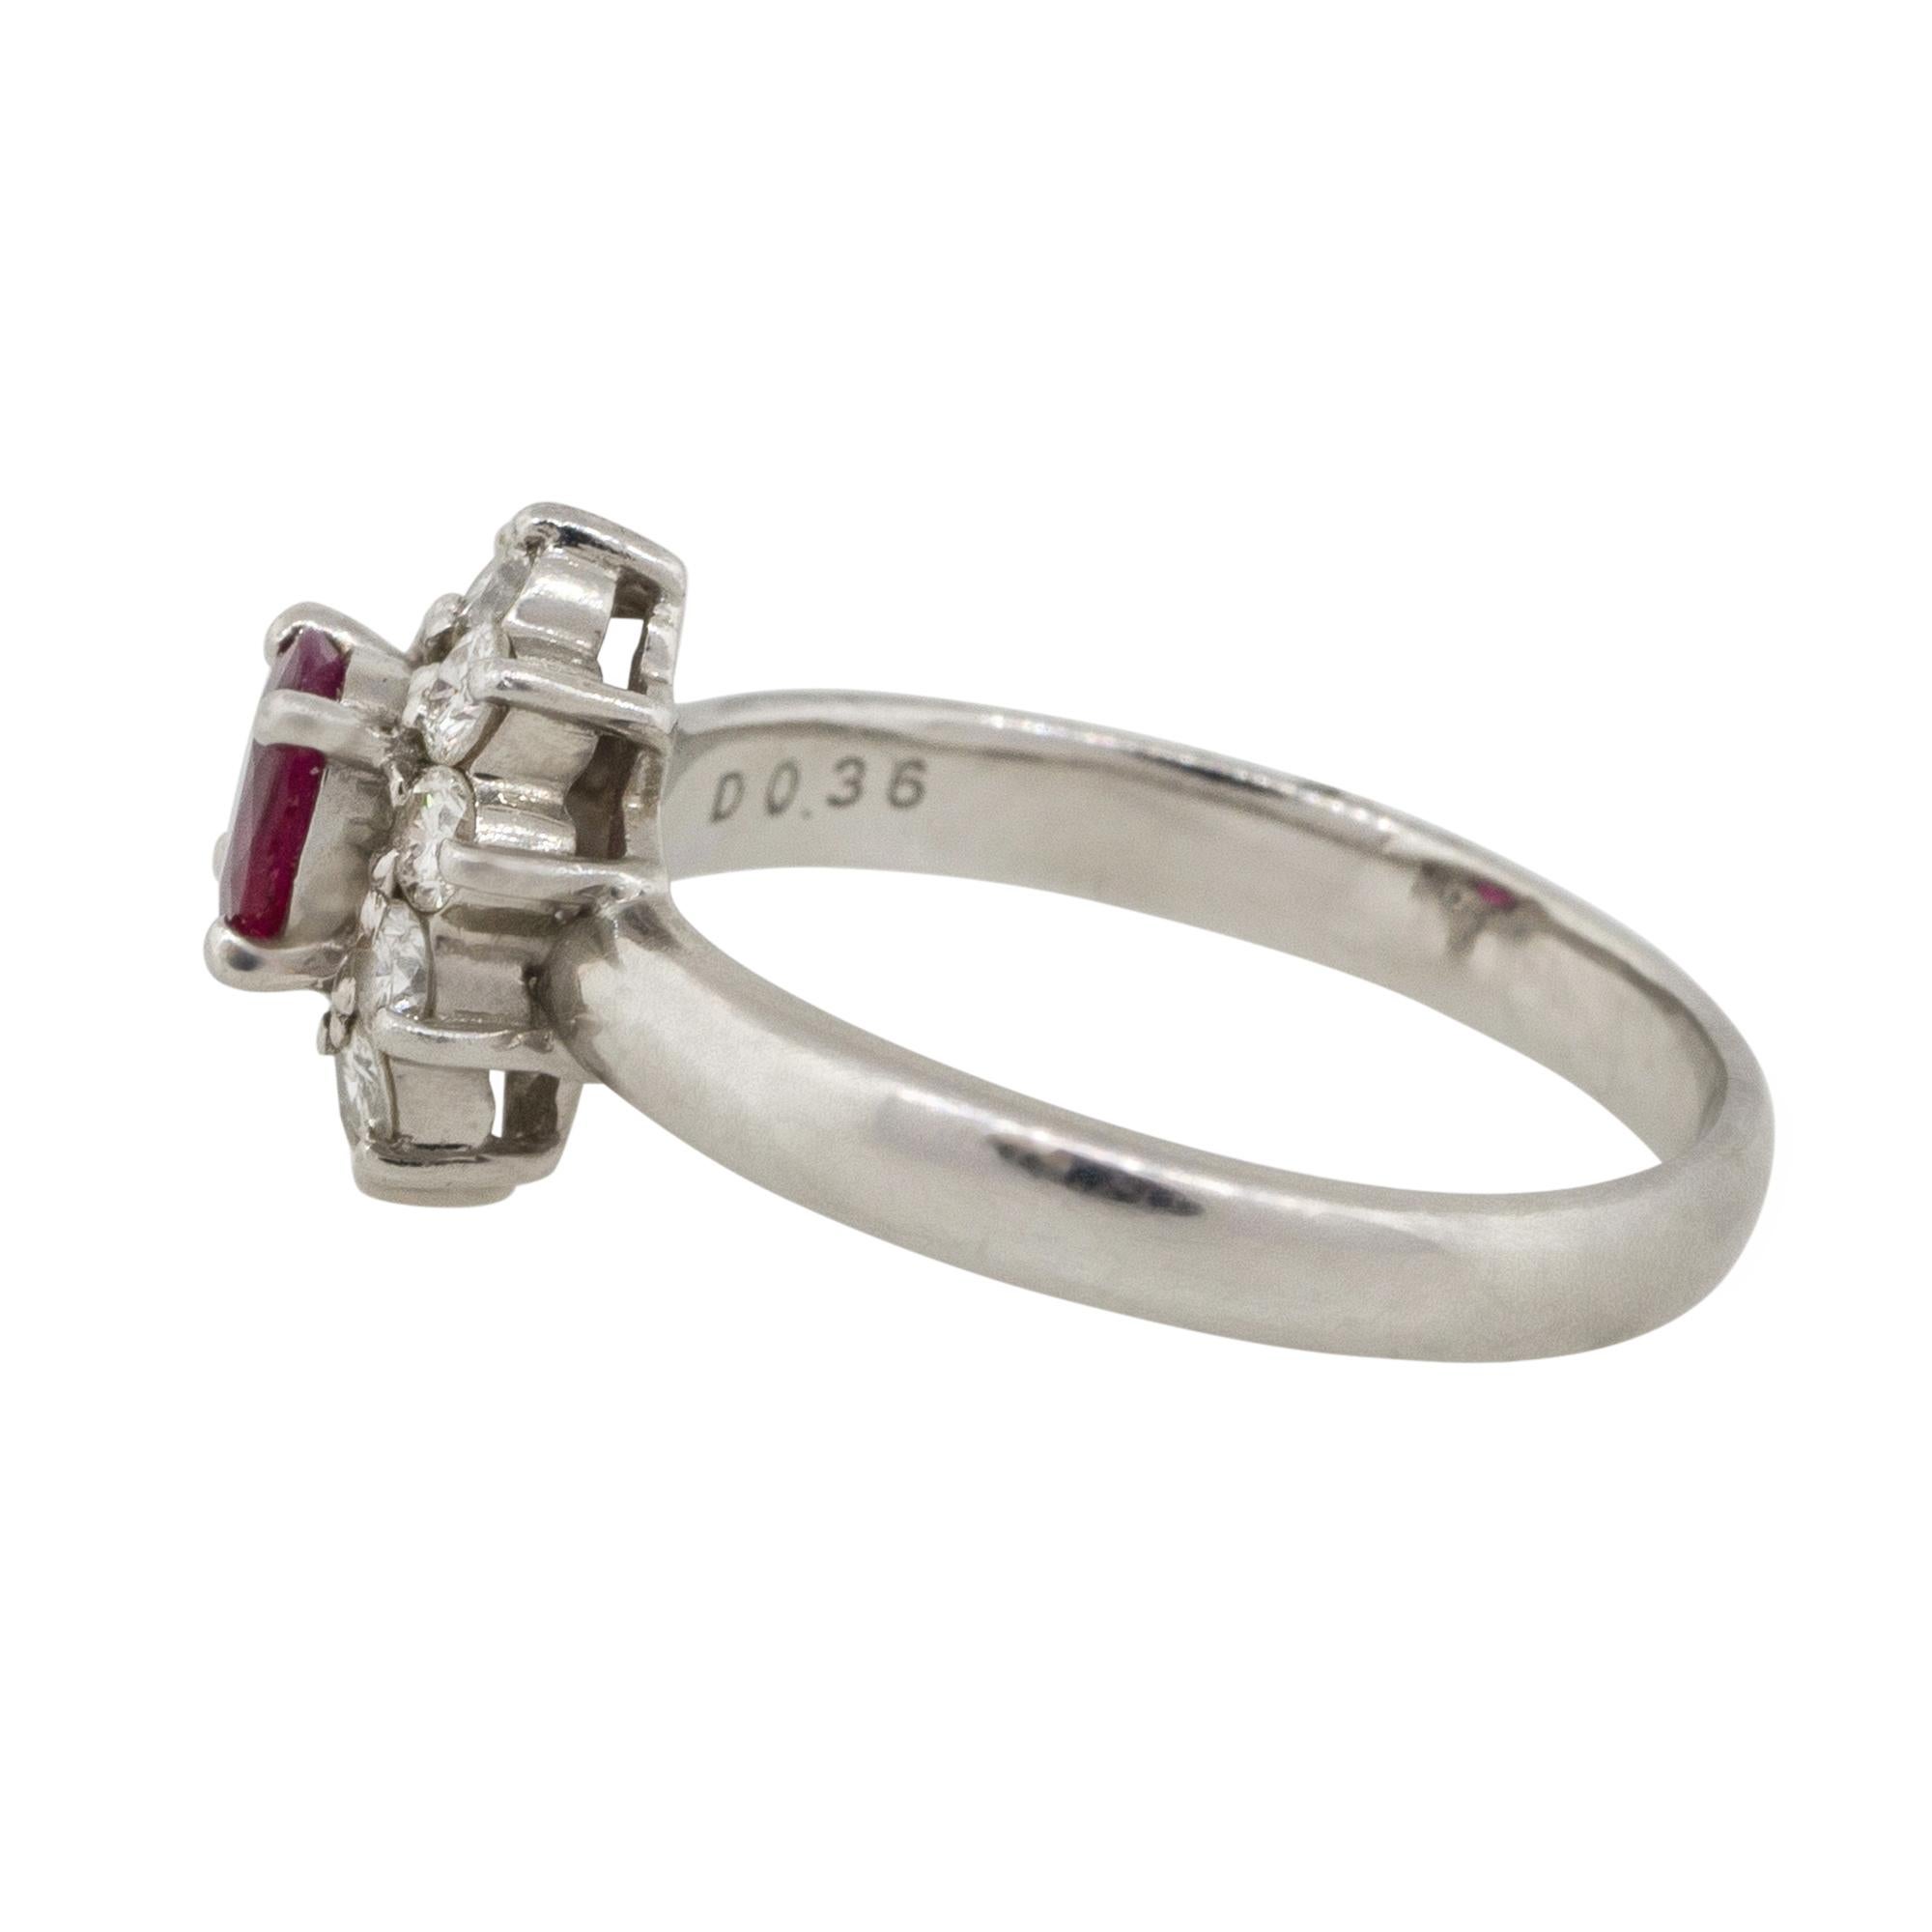 Oval Cut 0.38 Carat Oval Ruby Diamond Halo Flower Ring Platinum in Stock